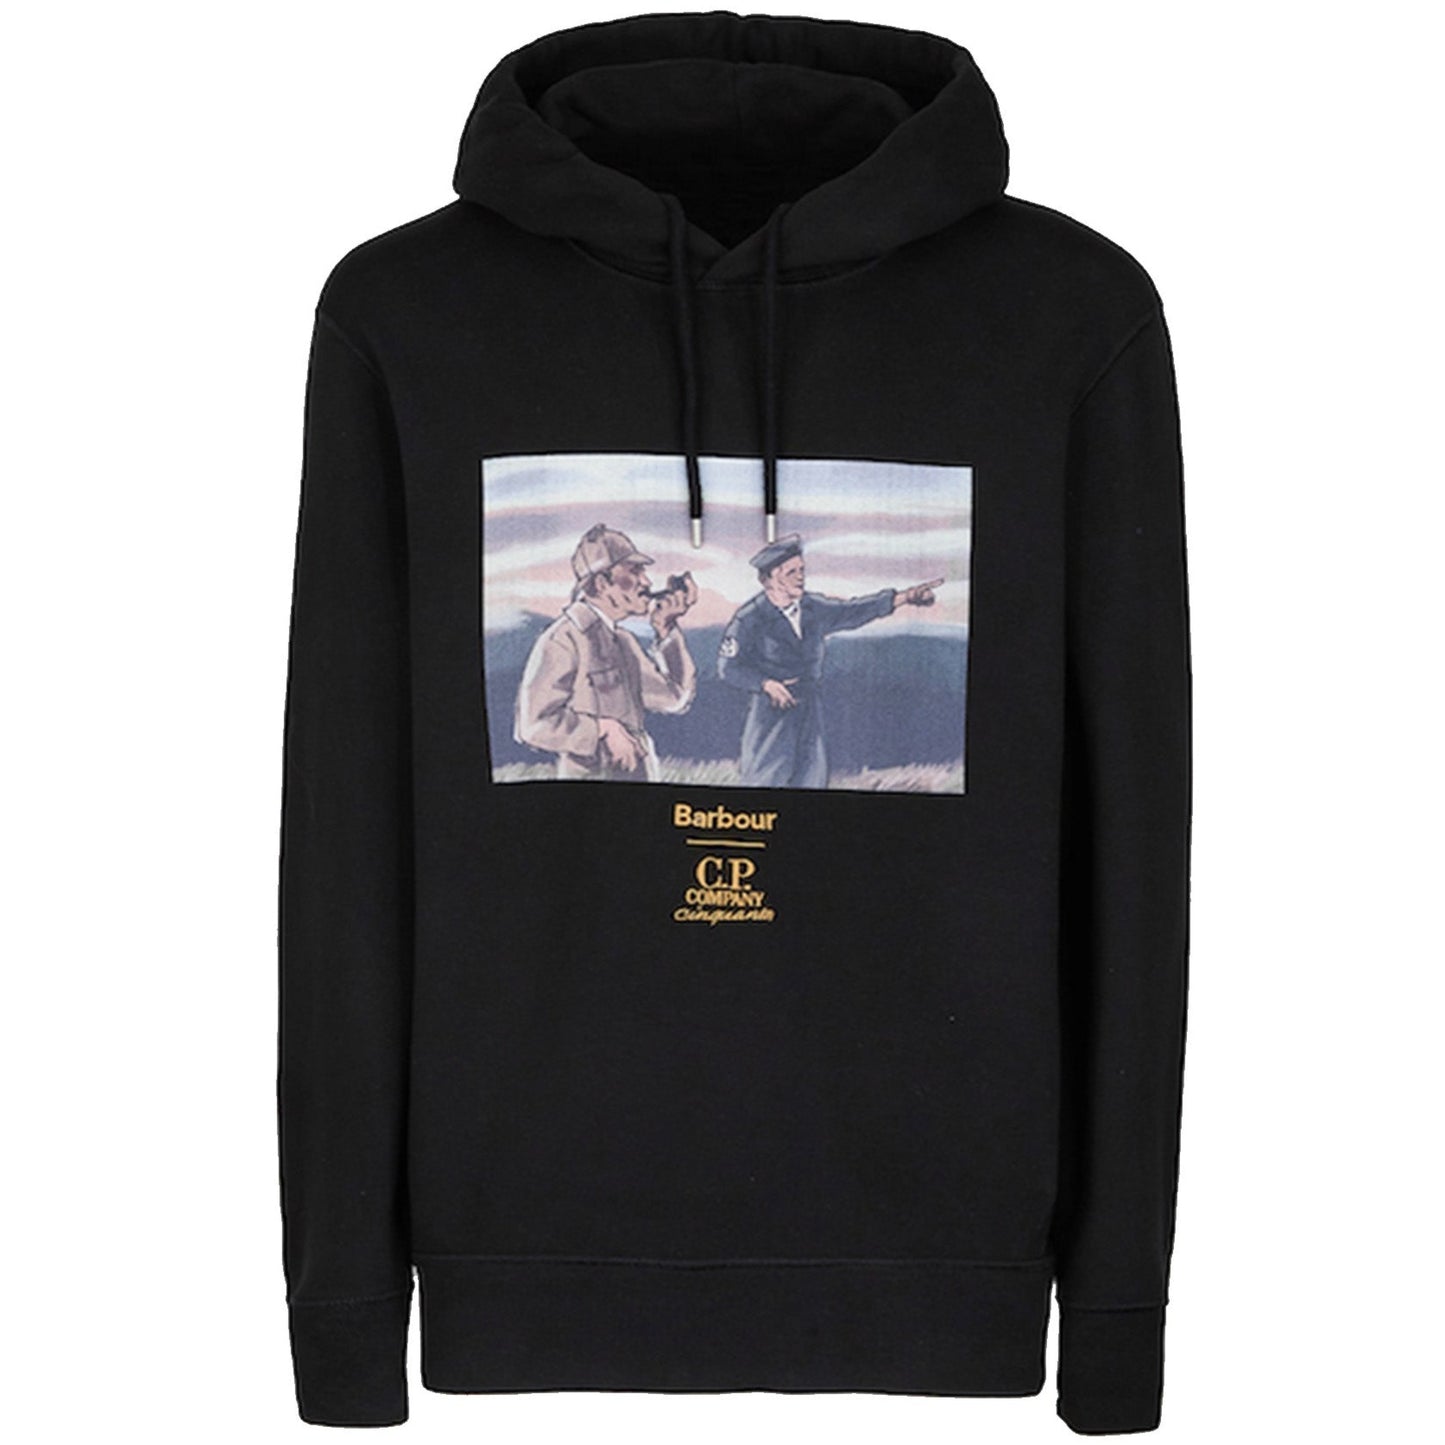 CP Company Barbour 50th Anniversary Hoodie - DANYOUNGUK